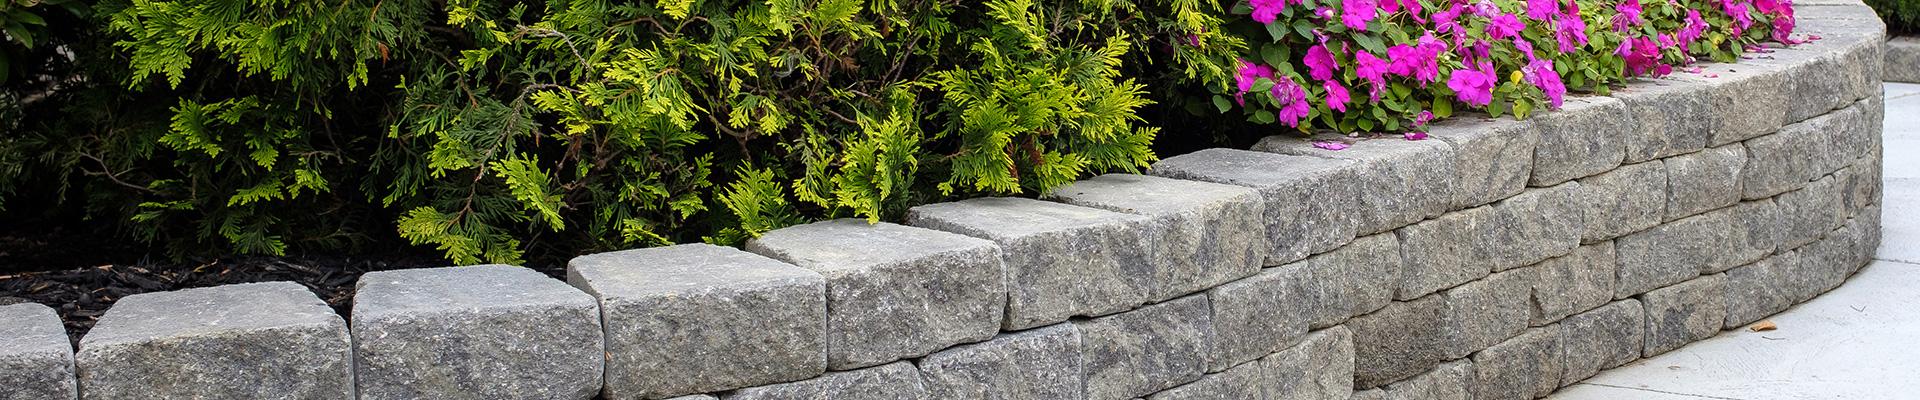 Stone retaining wall with shrubs and flowers